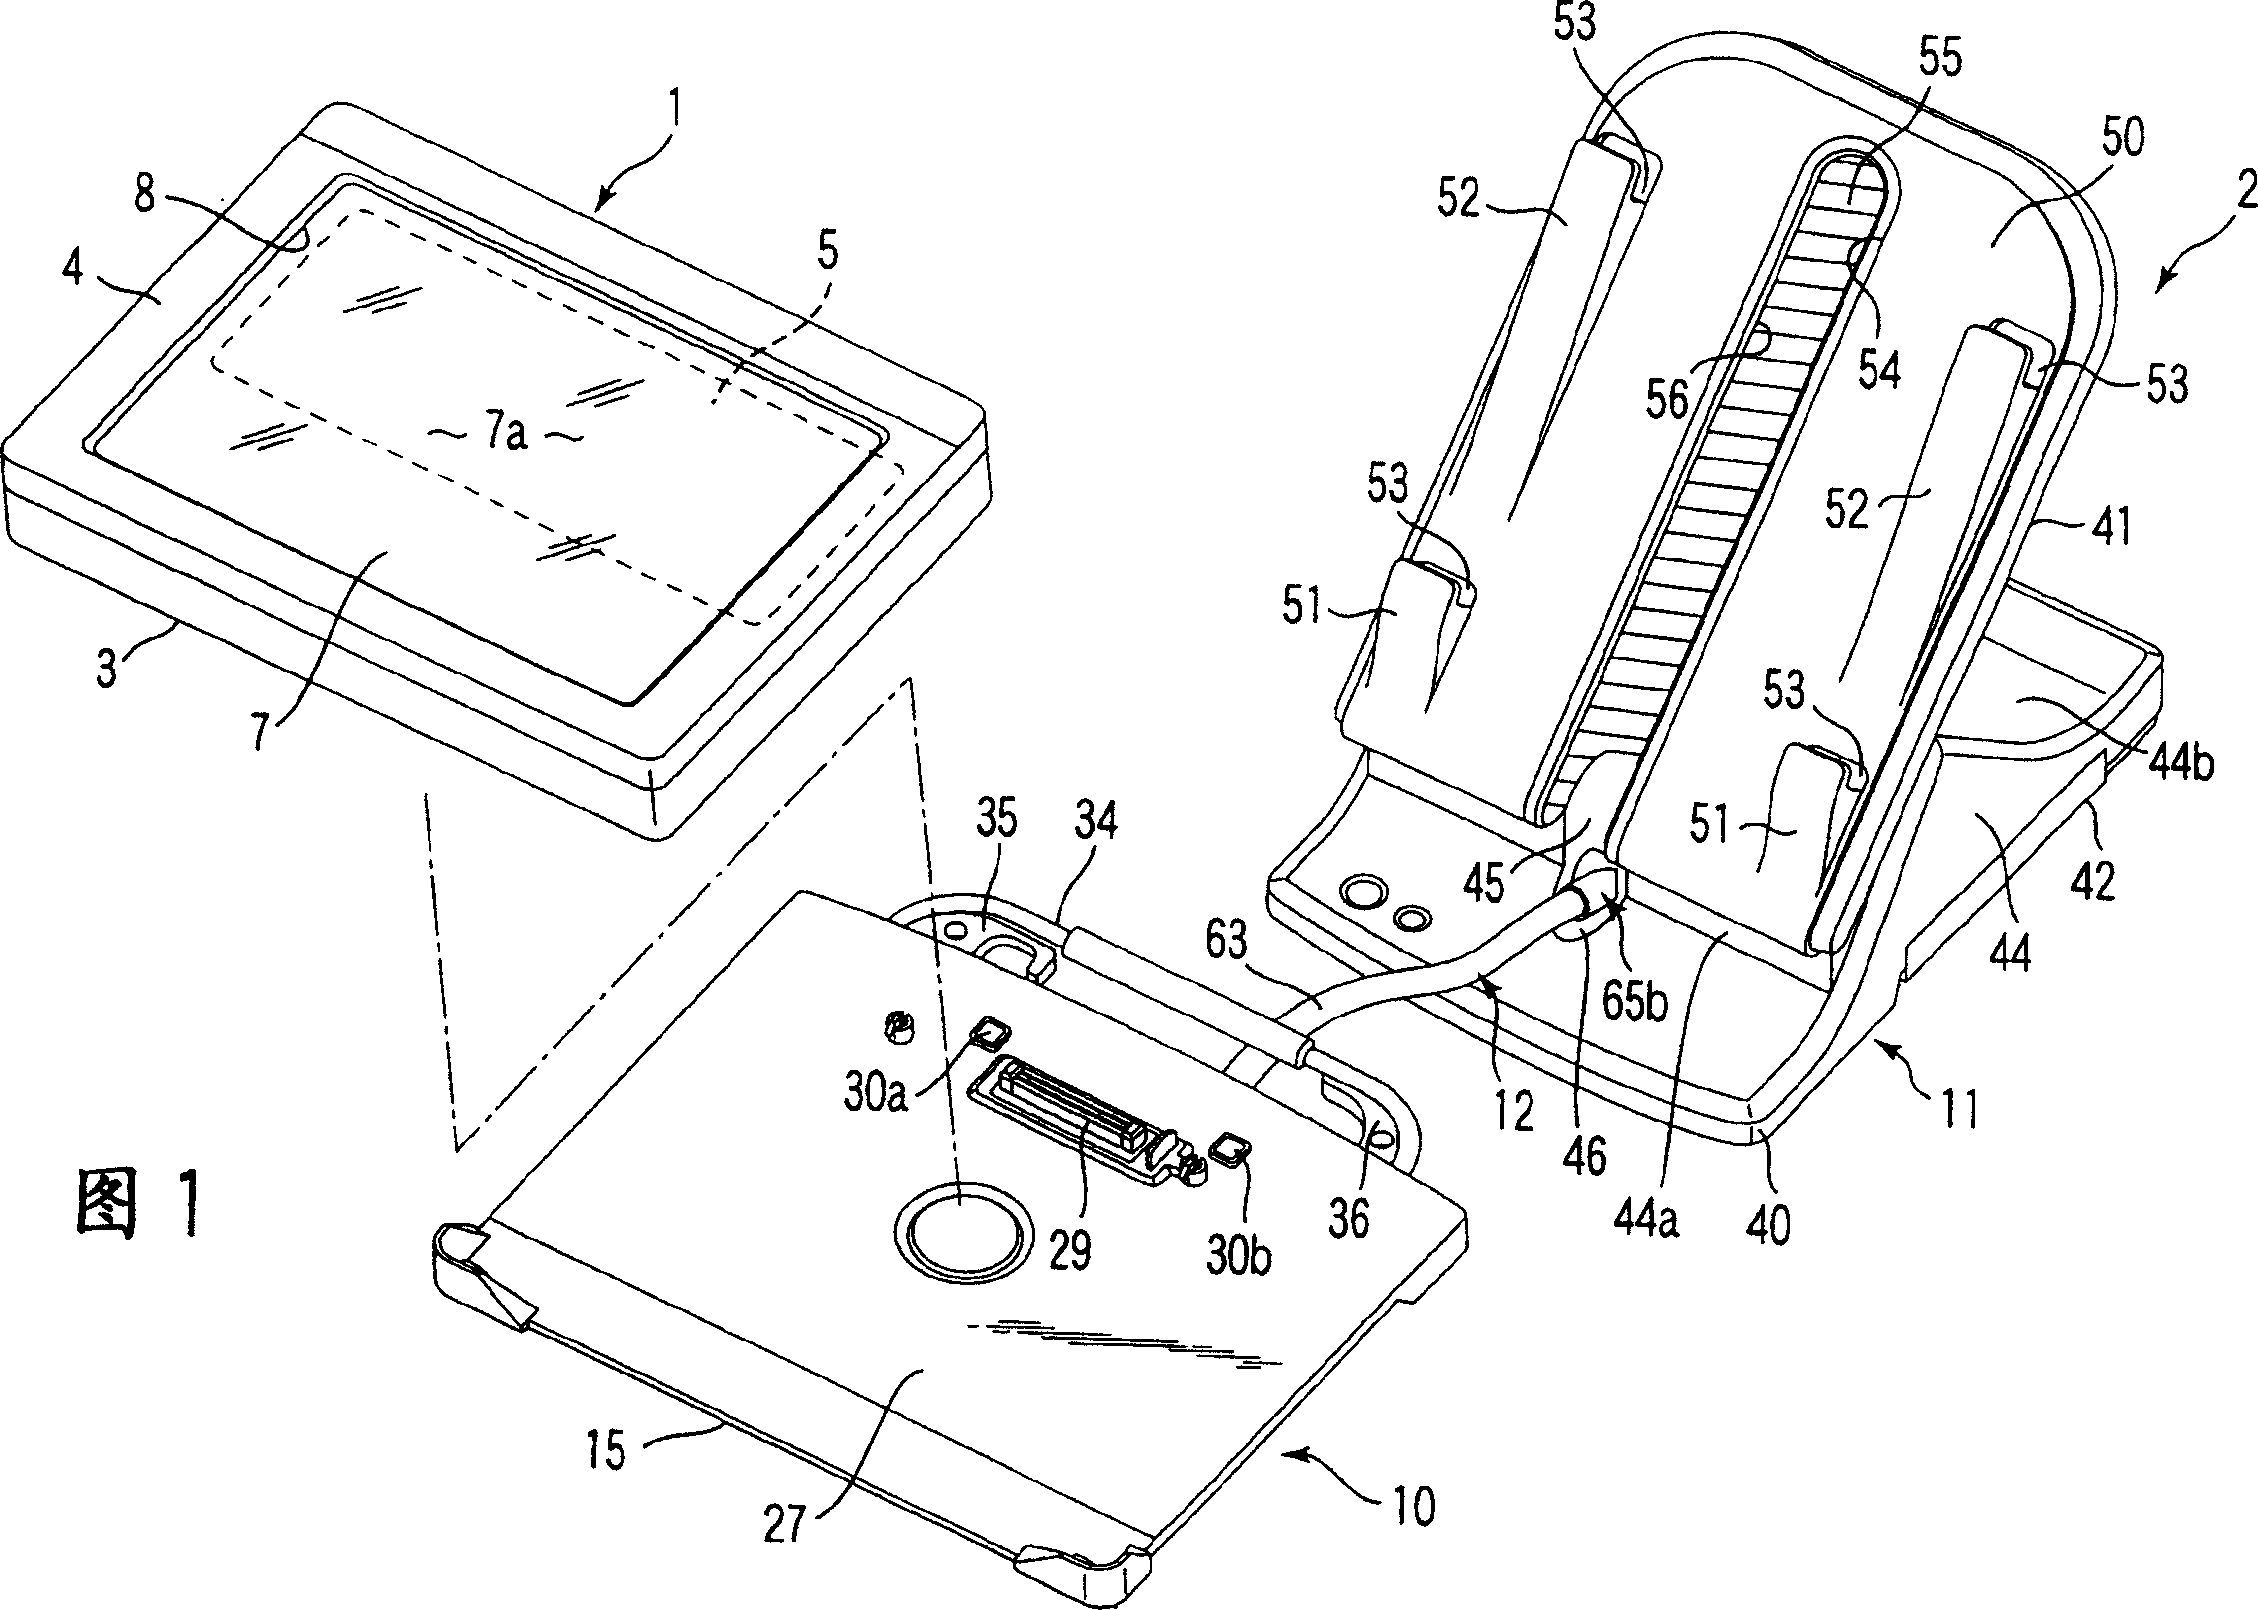 Support device with cable guide for leading cable locating line